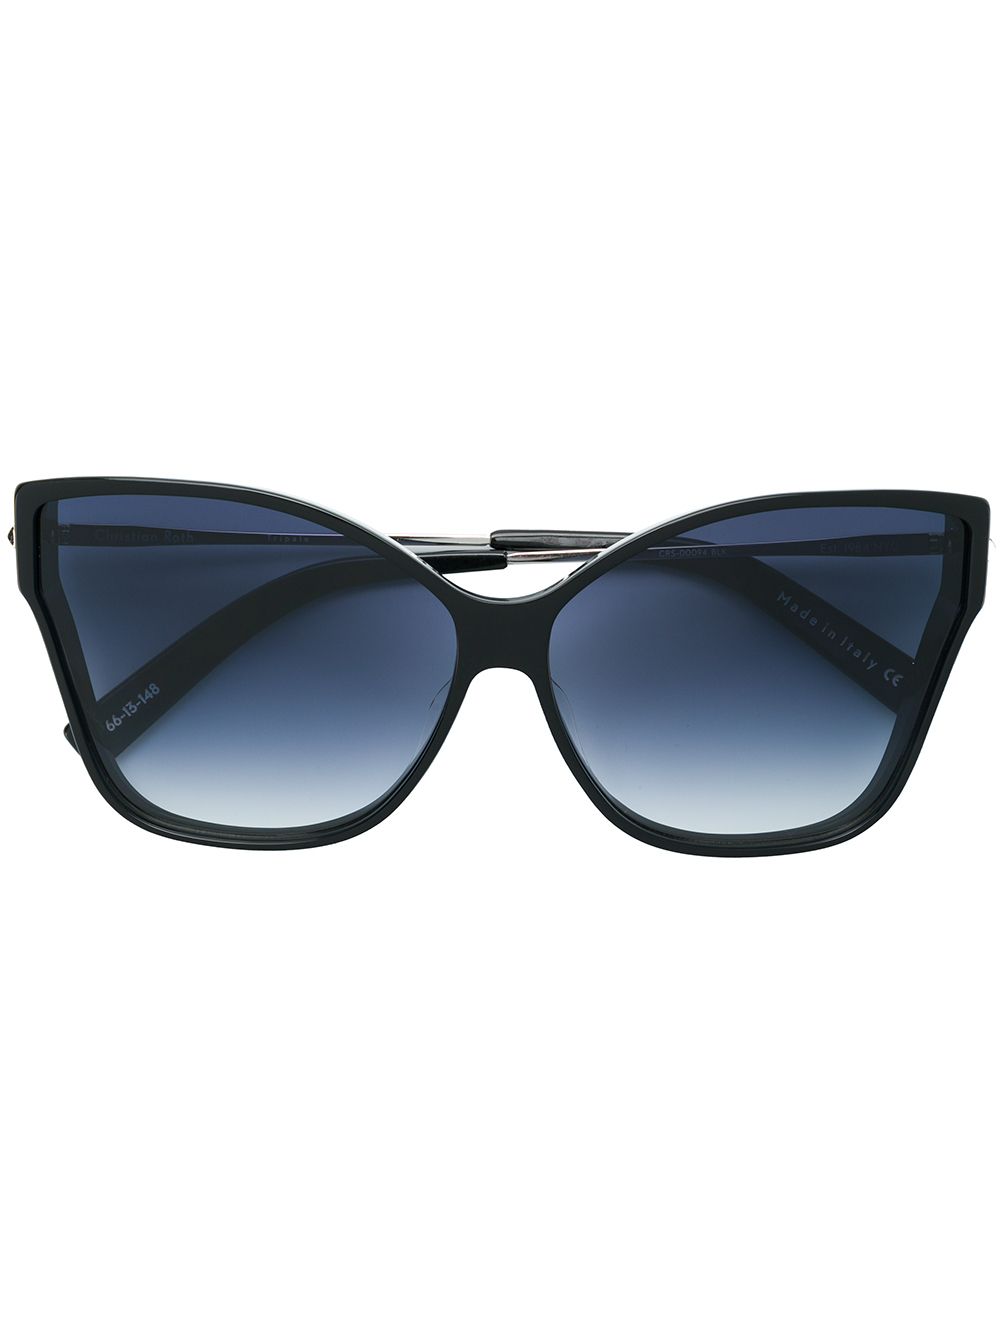 CHRISTIAN ROTH OVERSIZED BUTTERFLY SHAPE SUNGLASSES,TRIPALE12946906